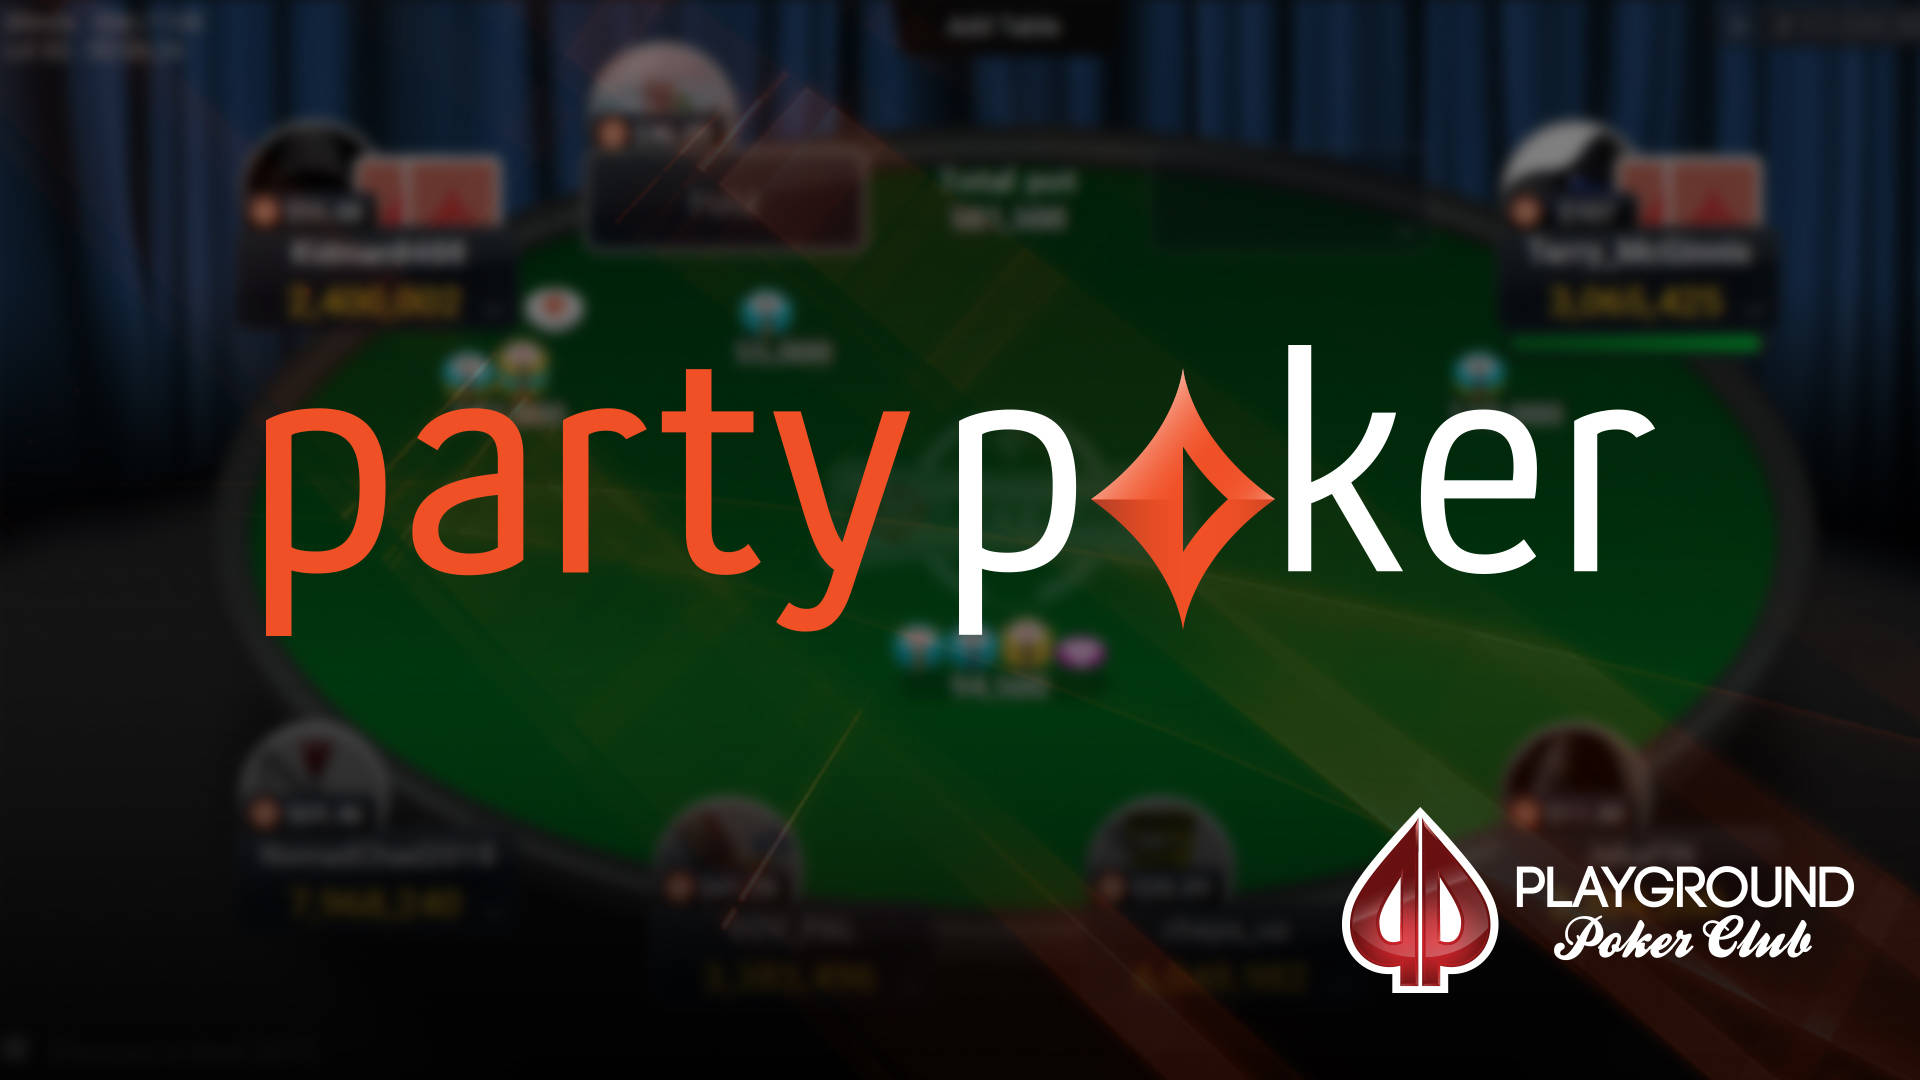 Multi-table tournaments on partypoker are getting better!